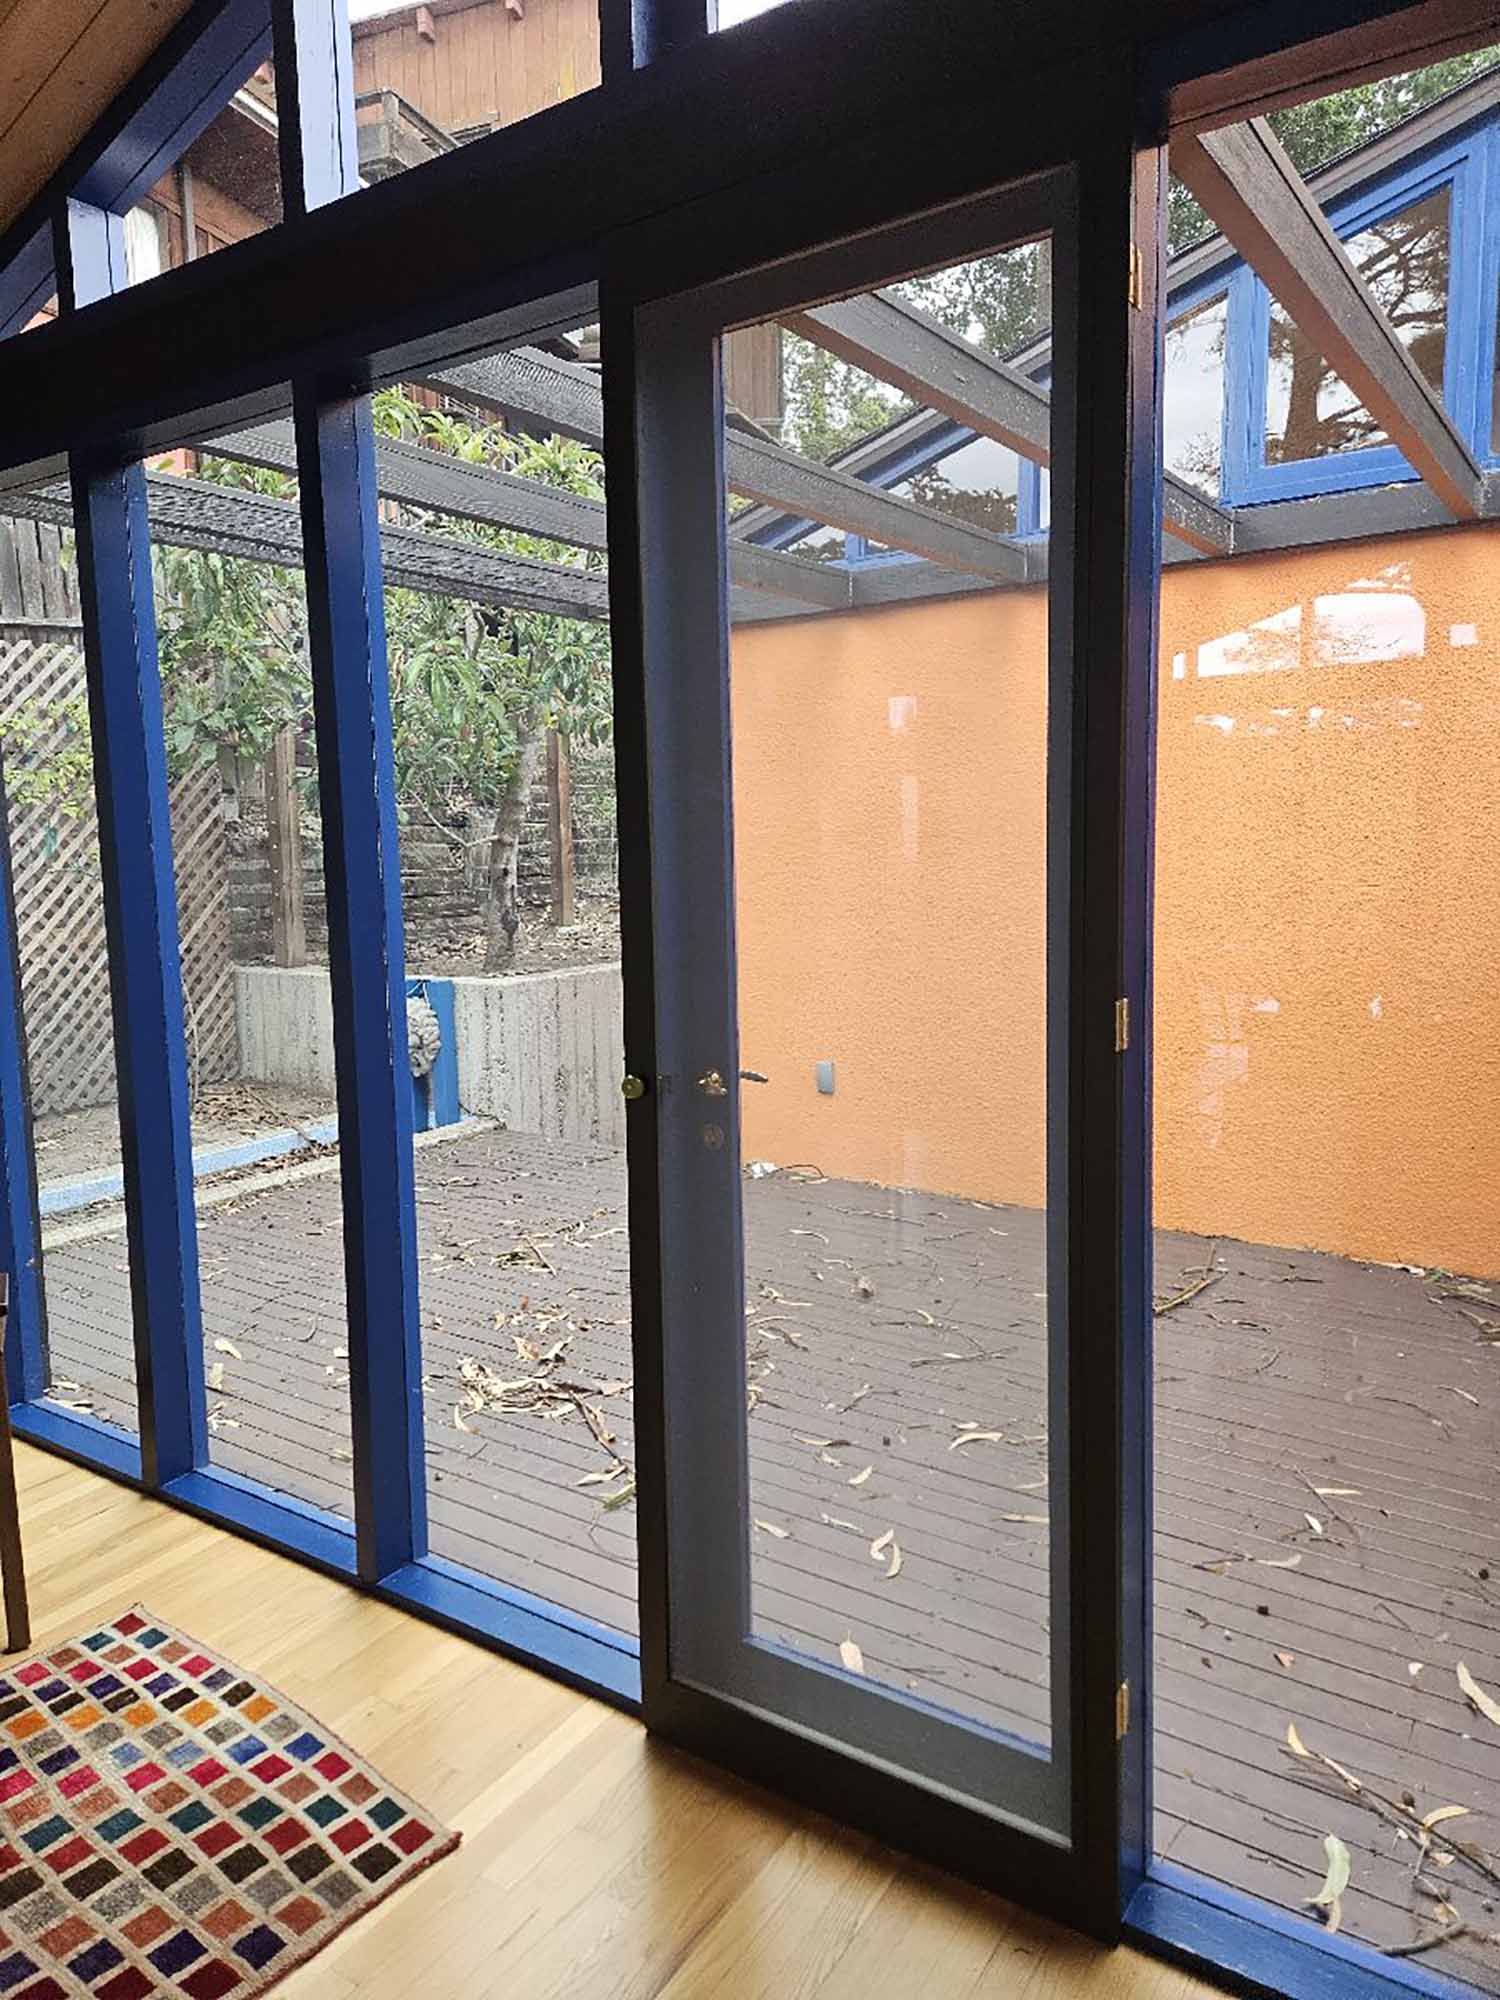 ClimatePro Installs 3M Safety Window Film for a Berkeley, CA Home